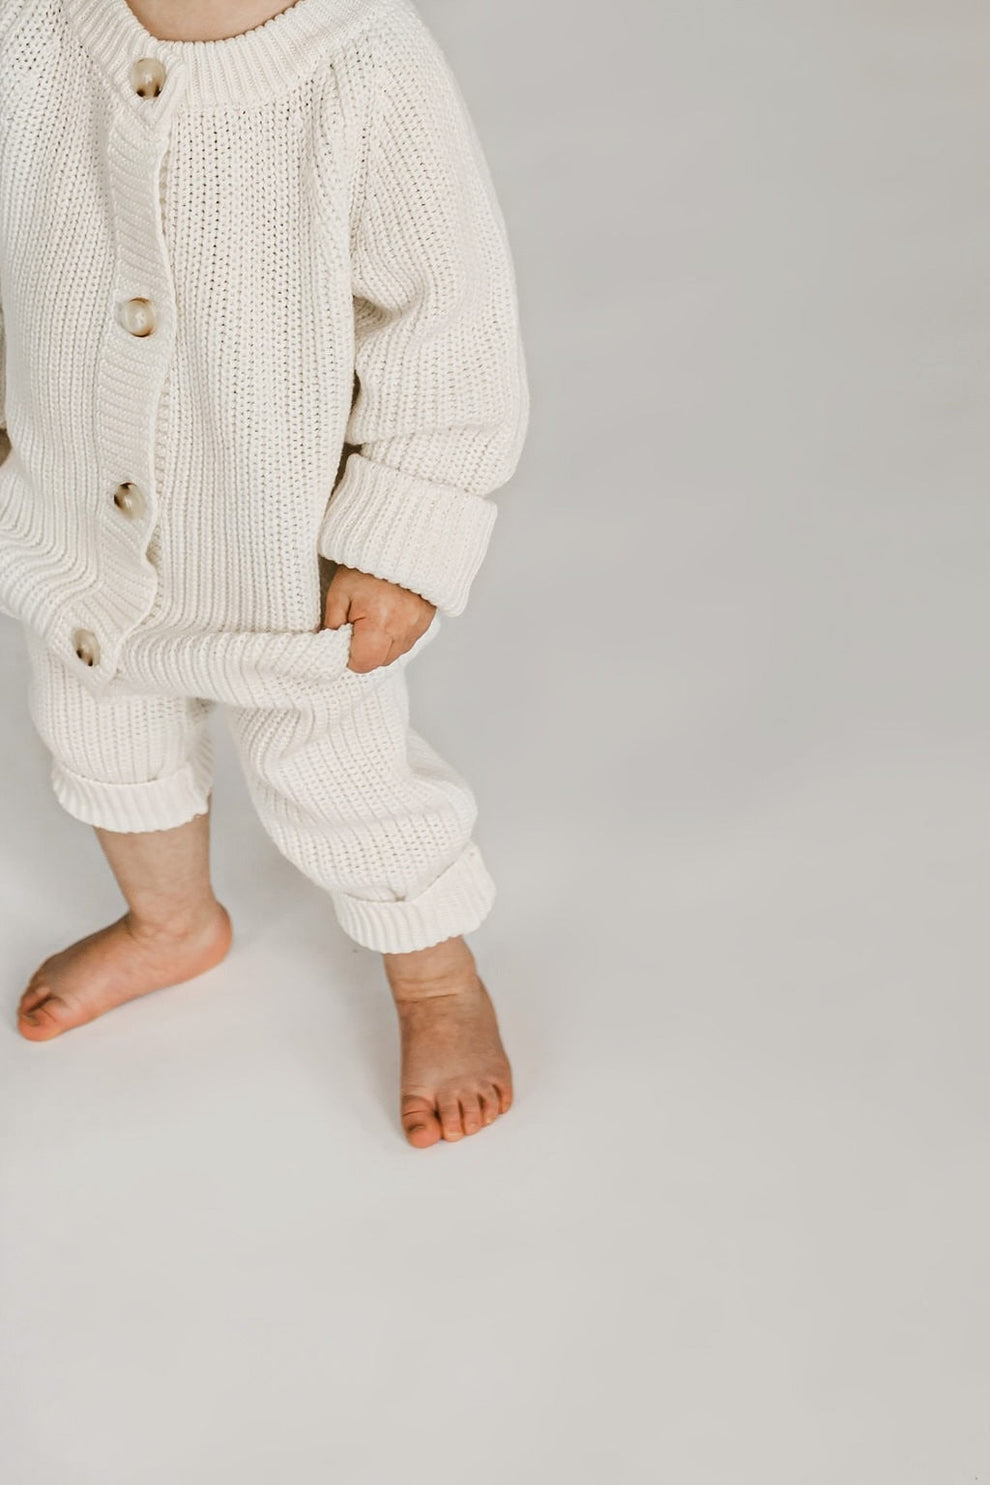 OAT co Powder Chunky Playsuit